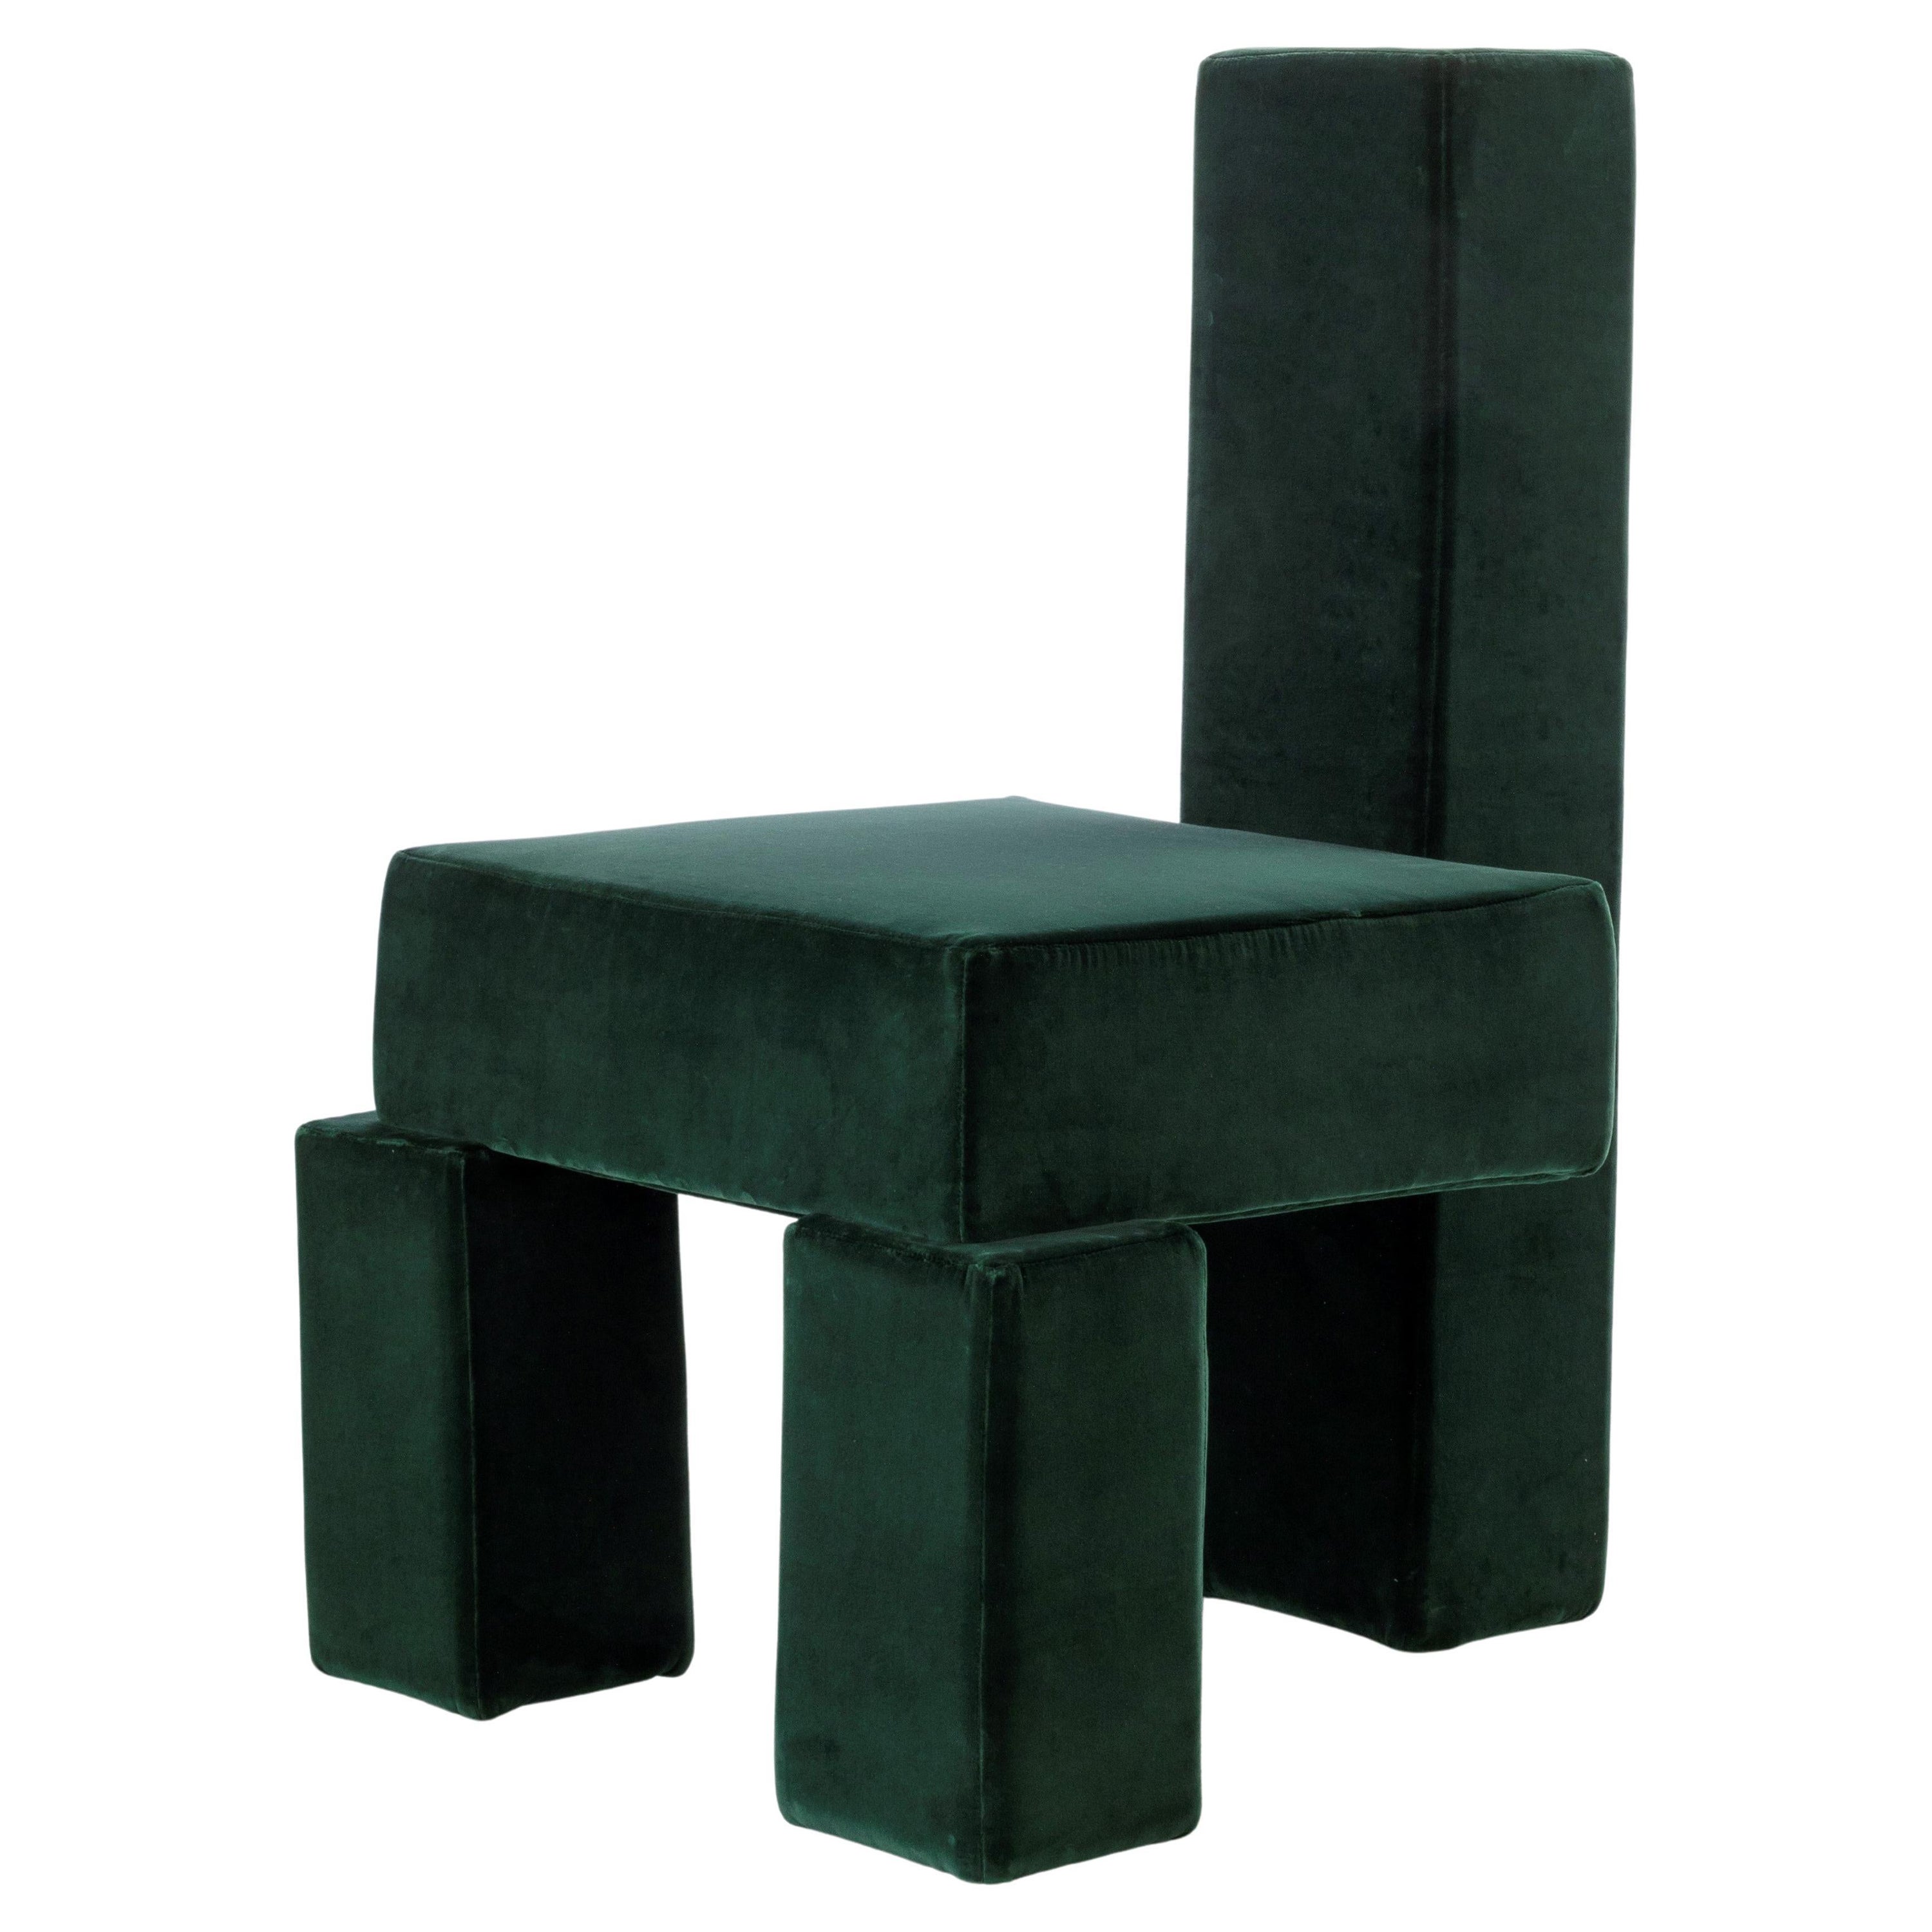 Licitra Chair by Pietro Franceschini